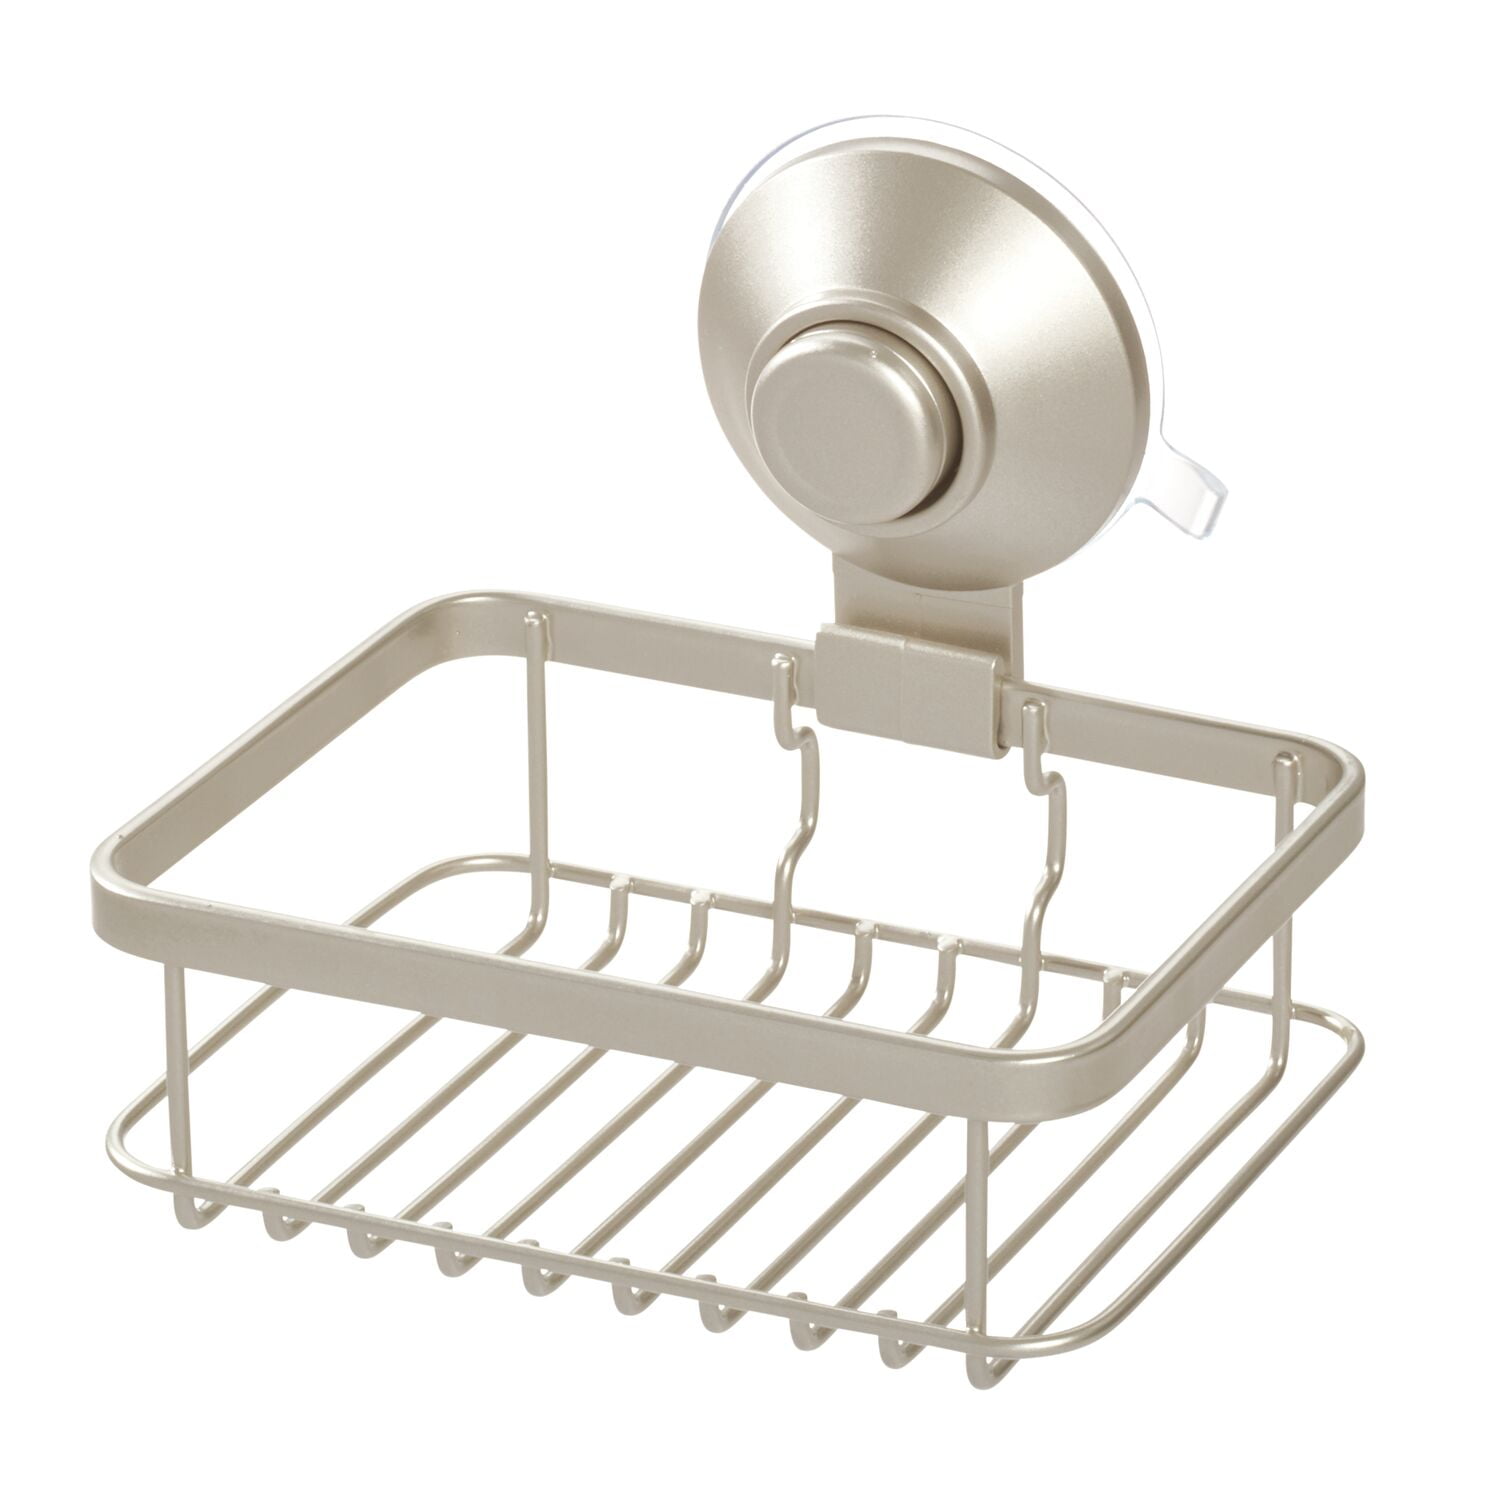 HASKO accessories Suction Soap Dish with Hooks - Super Powerful Vacuum  Suction Cup Shower Soap Holder - Rustproof Stainless Steel SS304 Soap  Basket 